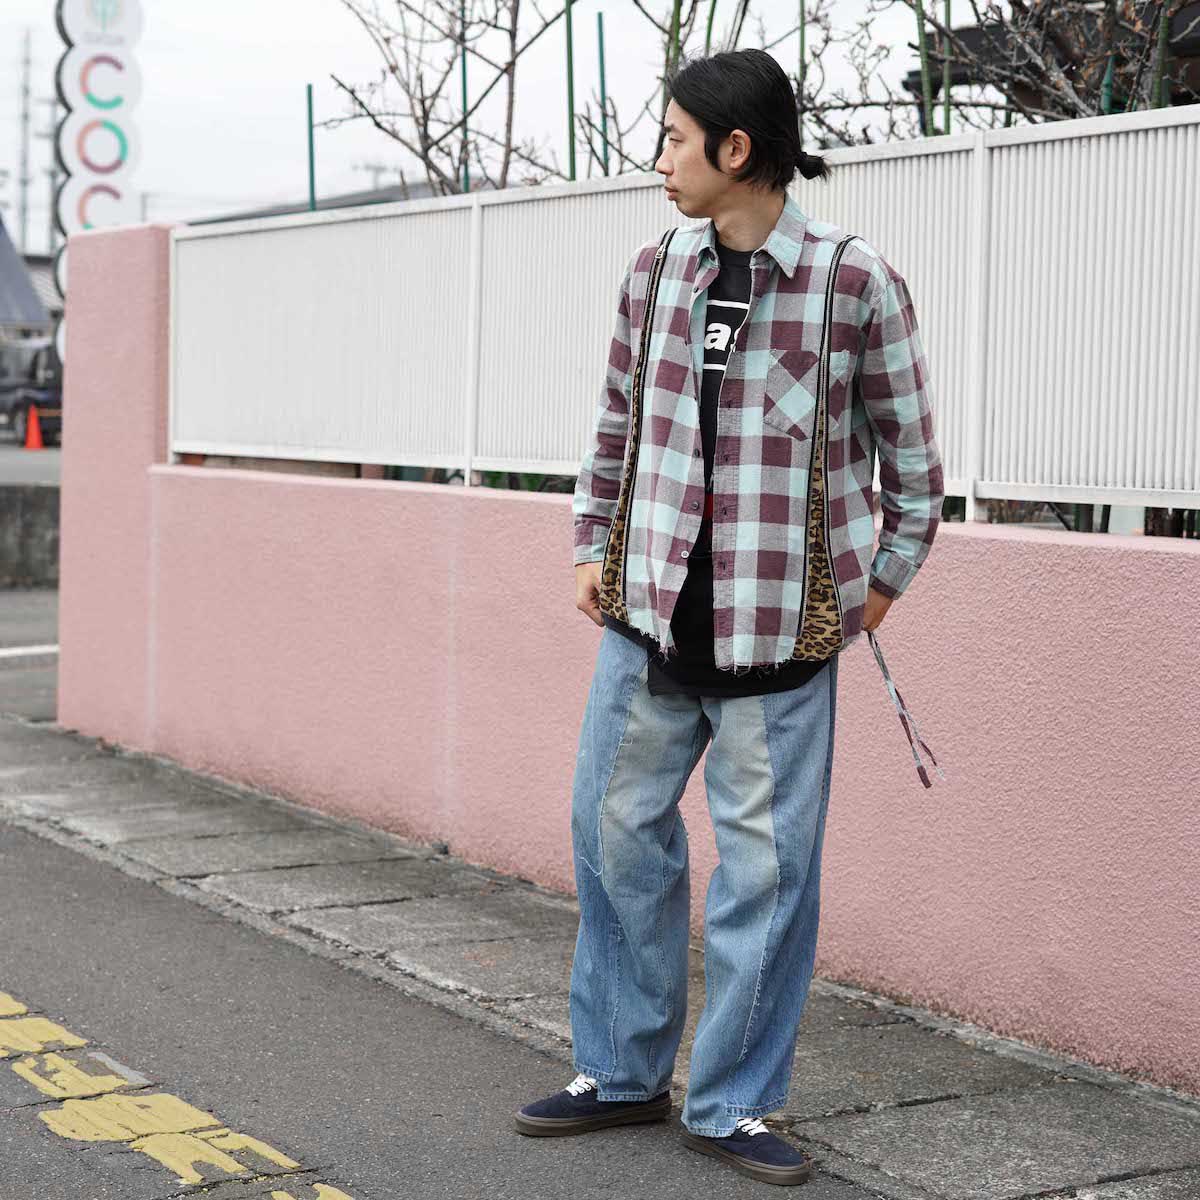 OLD PARK / Sheet Wise Shirt Flannel イメージ  175cm着用